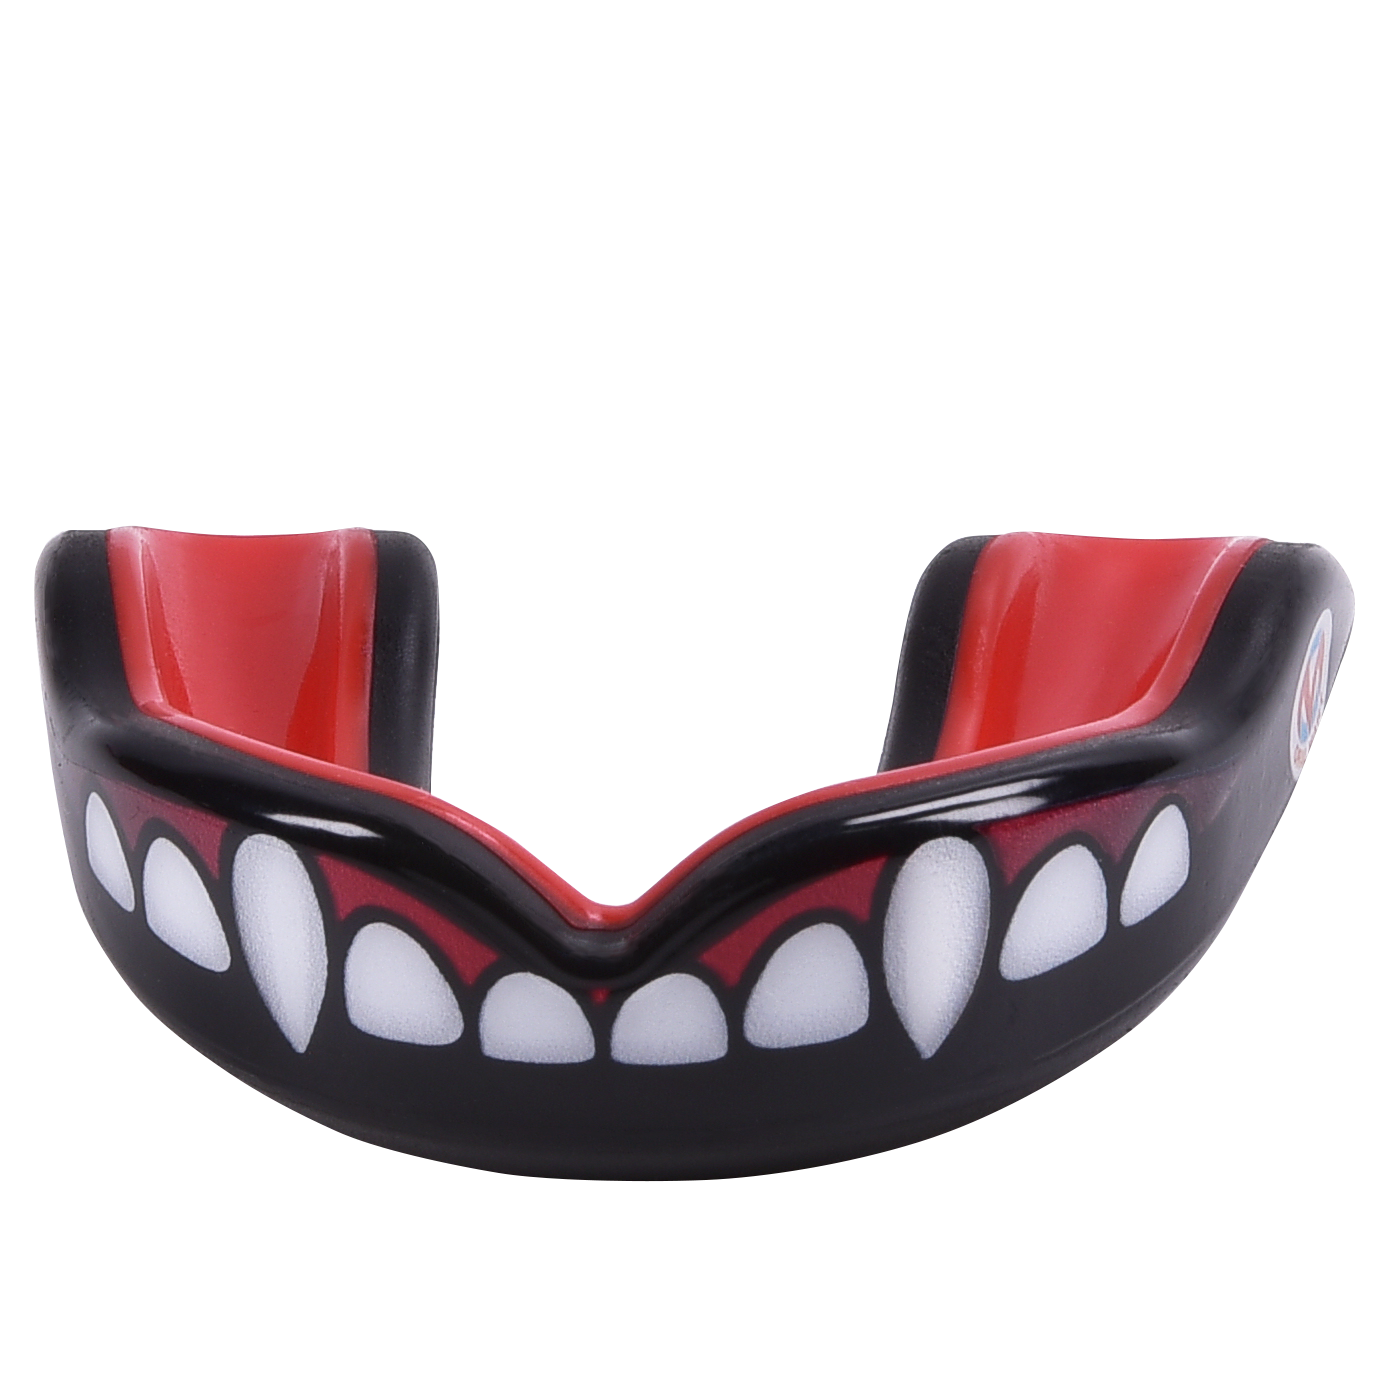 vampire fangs youth sports mouth guard for kids